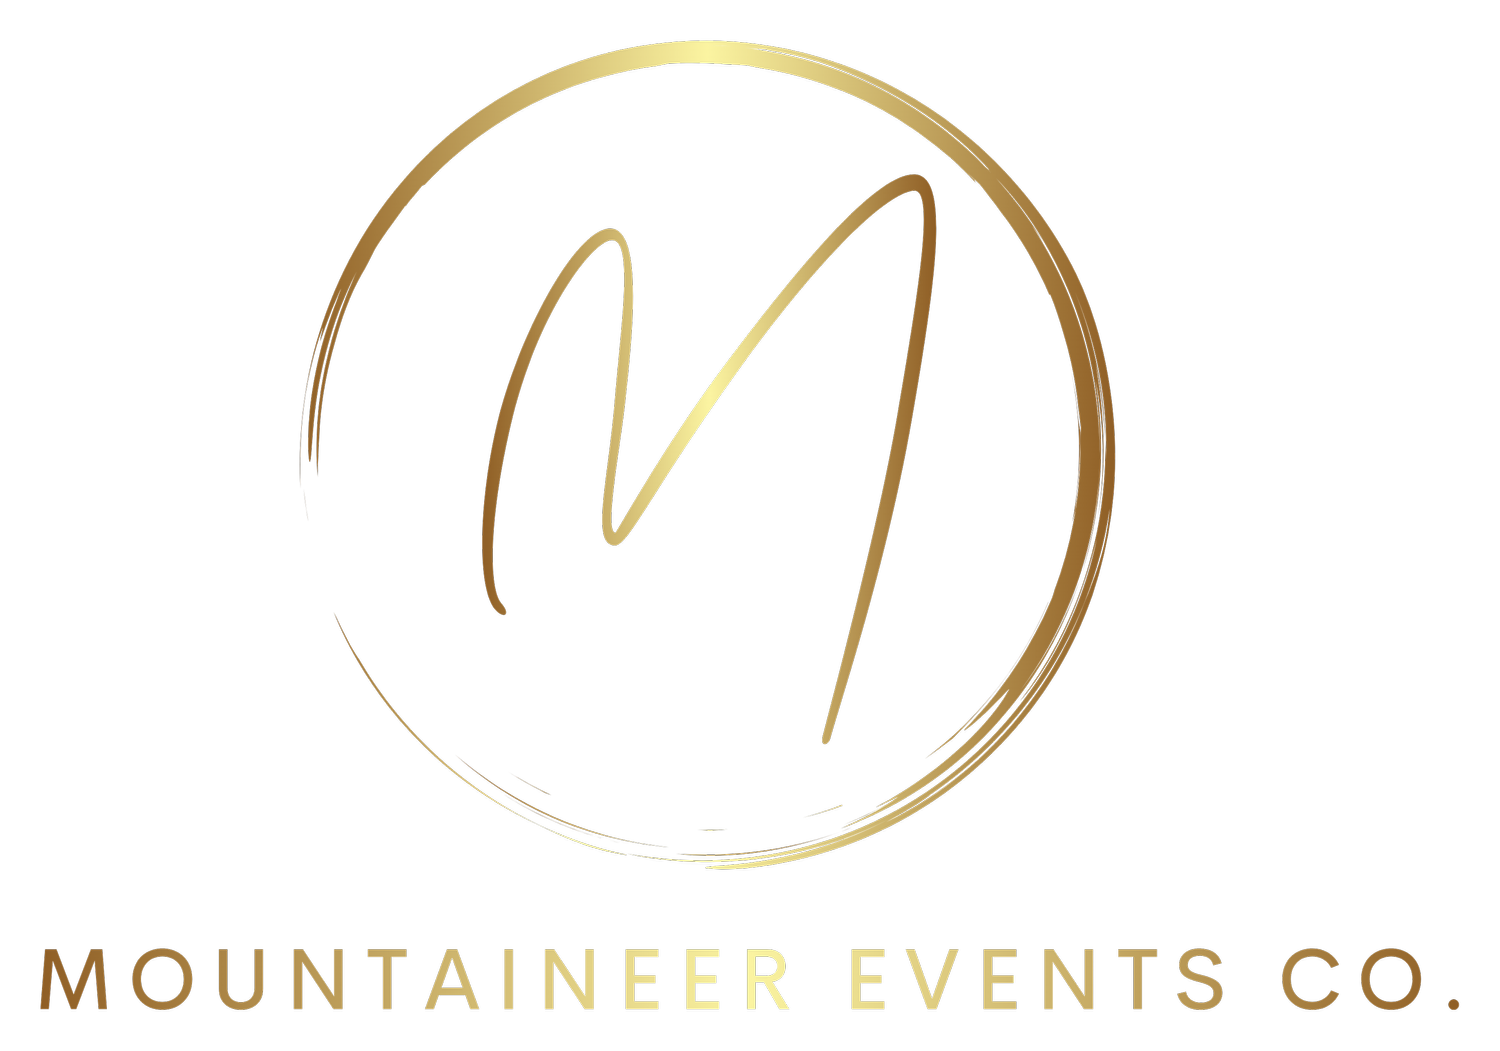 MOUNTAINEER EVENTS CO.